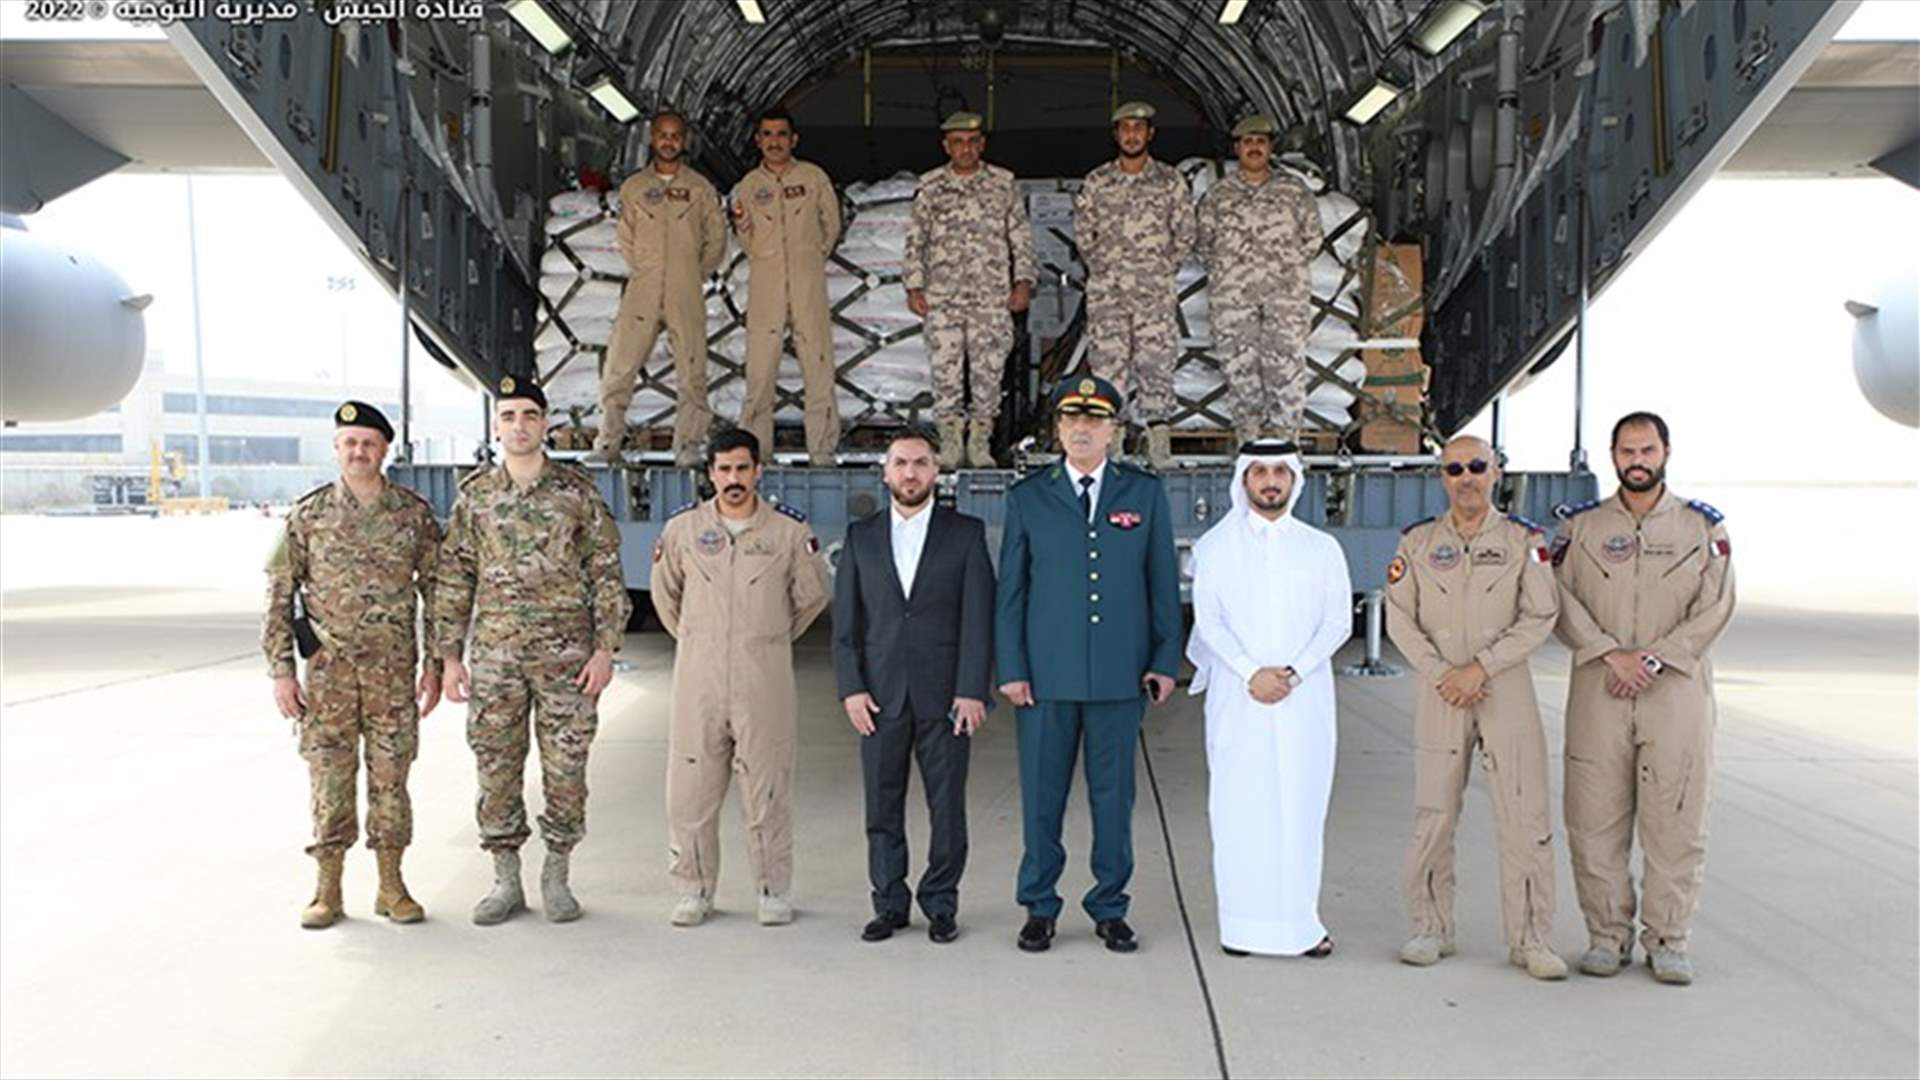 Food supplies provided by Qatar to Lebanese army